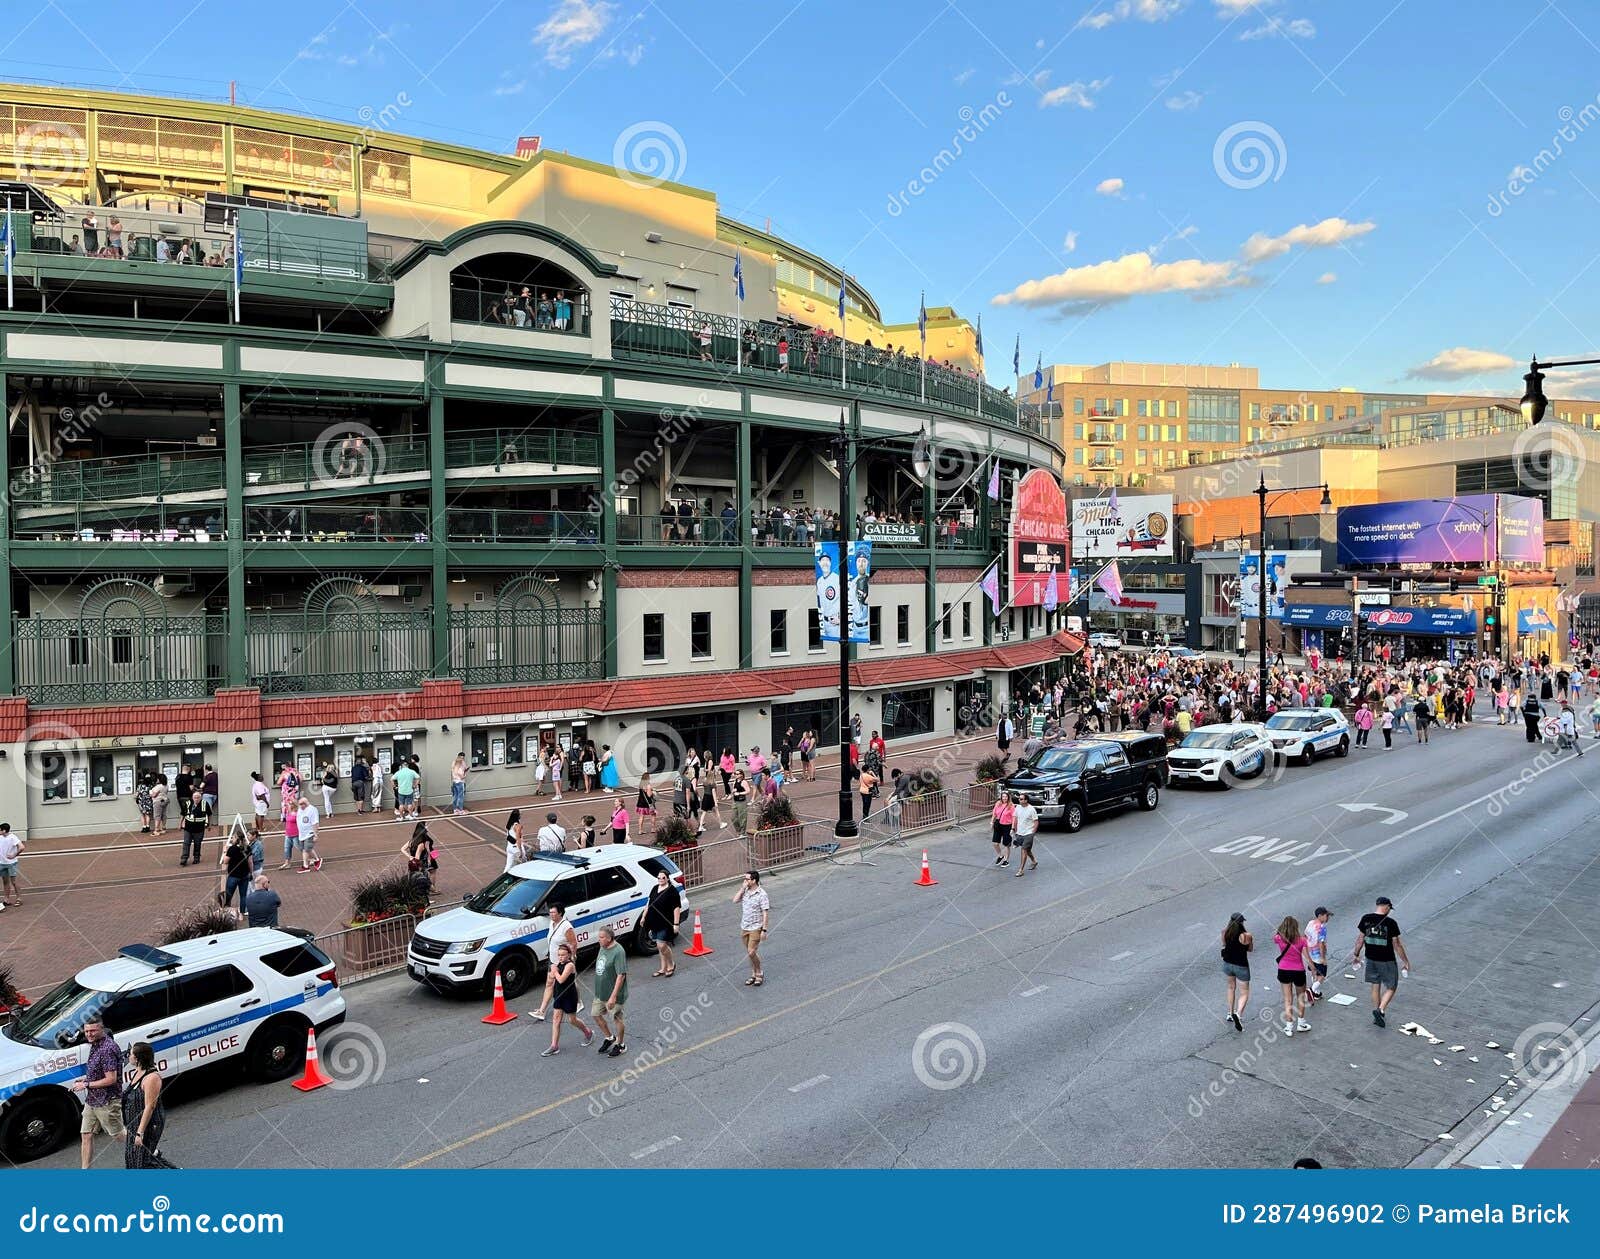 Wrigley Field before a Summer Concert in Chicago Illinois in August